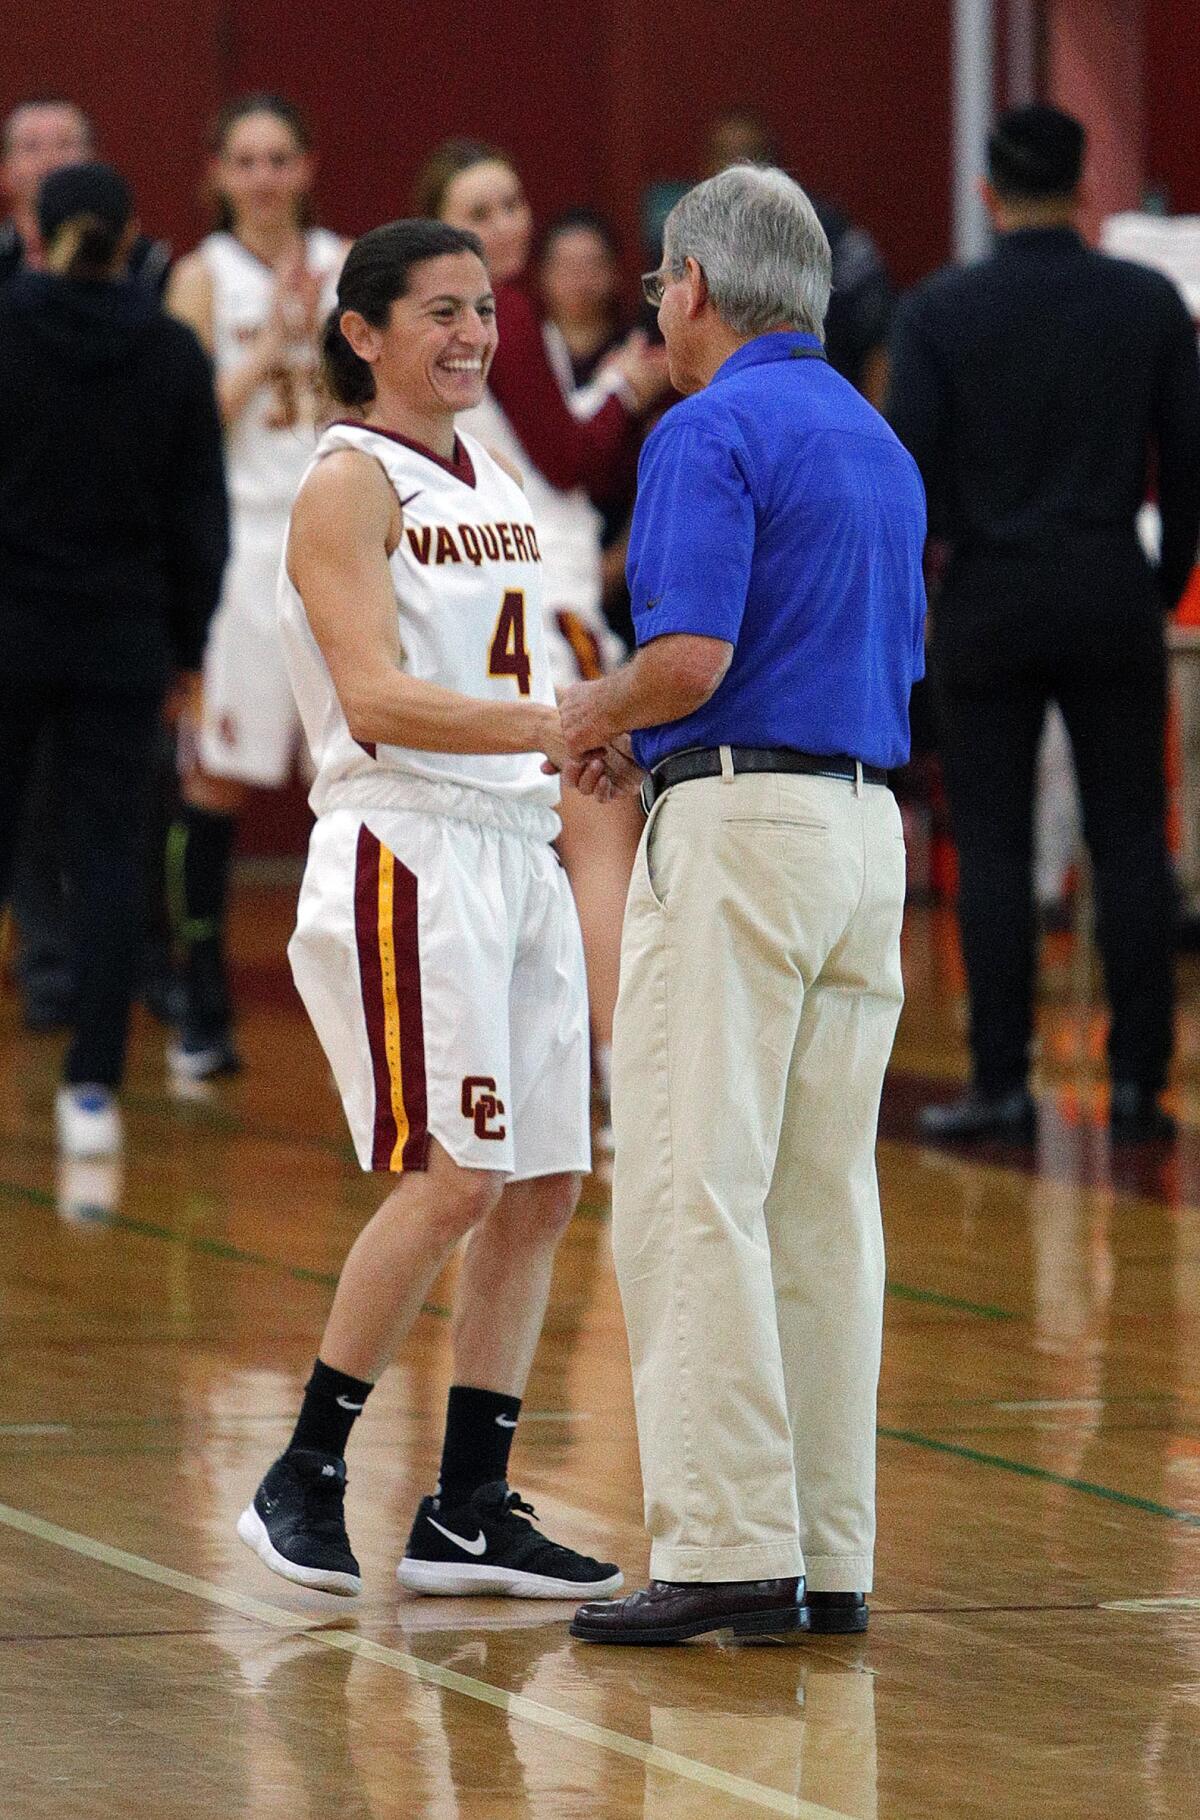 GCC's Vicky Oganyan shakes the hand of Allan Hancock's Cary Nerelli during introductions before a women's basketball game in the annual Vaquero basketball tournament at Glendale Community College on Wednesday, December 18, 2019. Oganyan is the long-time head coach of the Burroughs High School girls' basketball team and is playing for GCC while taking classes at GCC. Glendale won the game to improve to 10-1 on the season by defeating Allan Hancock 58-50.